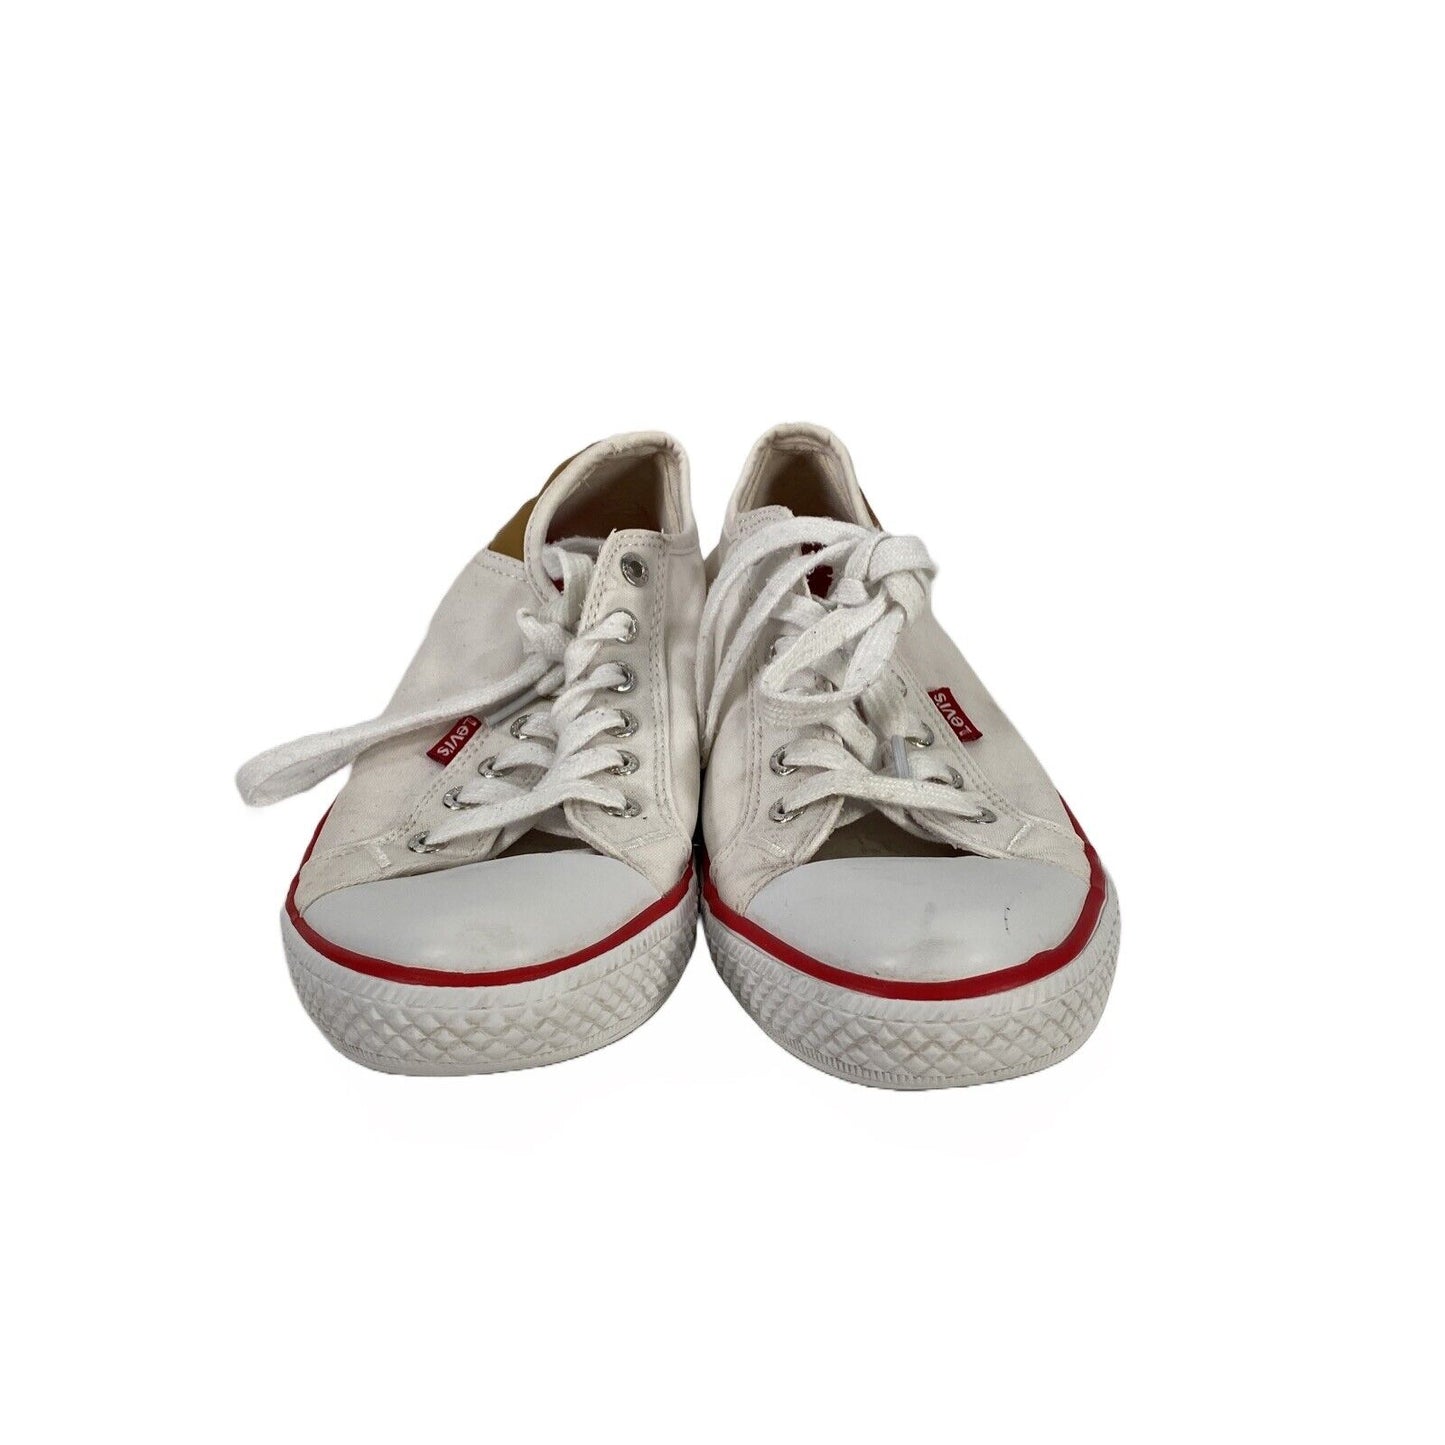 Levis Women's White Canvas Stan Buck Low Top Lace Up Sneakers - 8.5